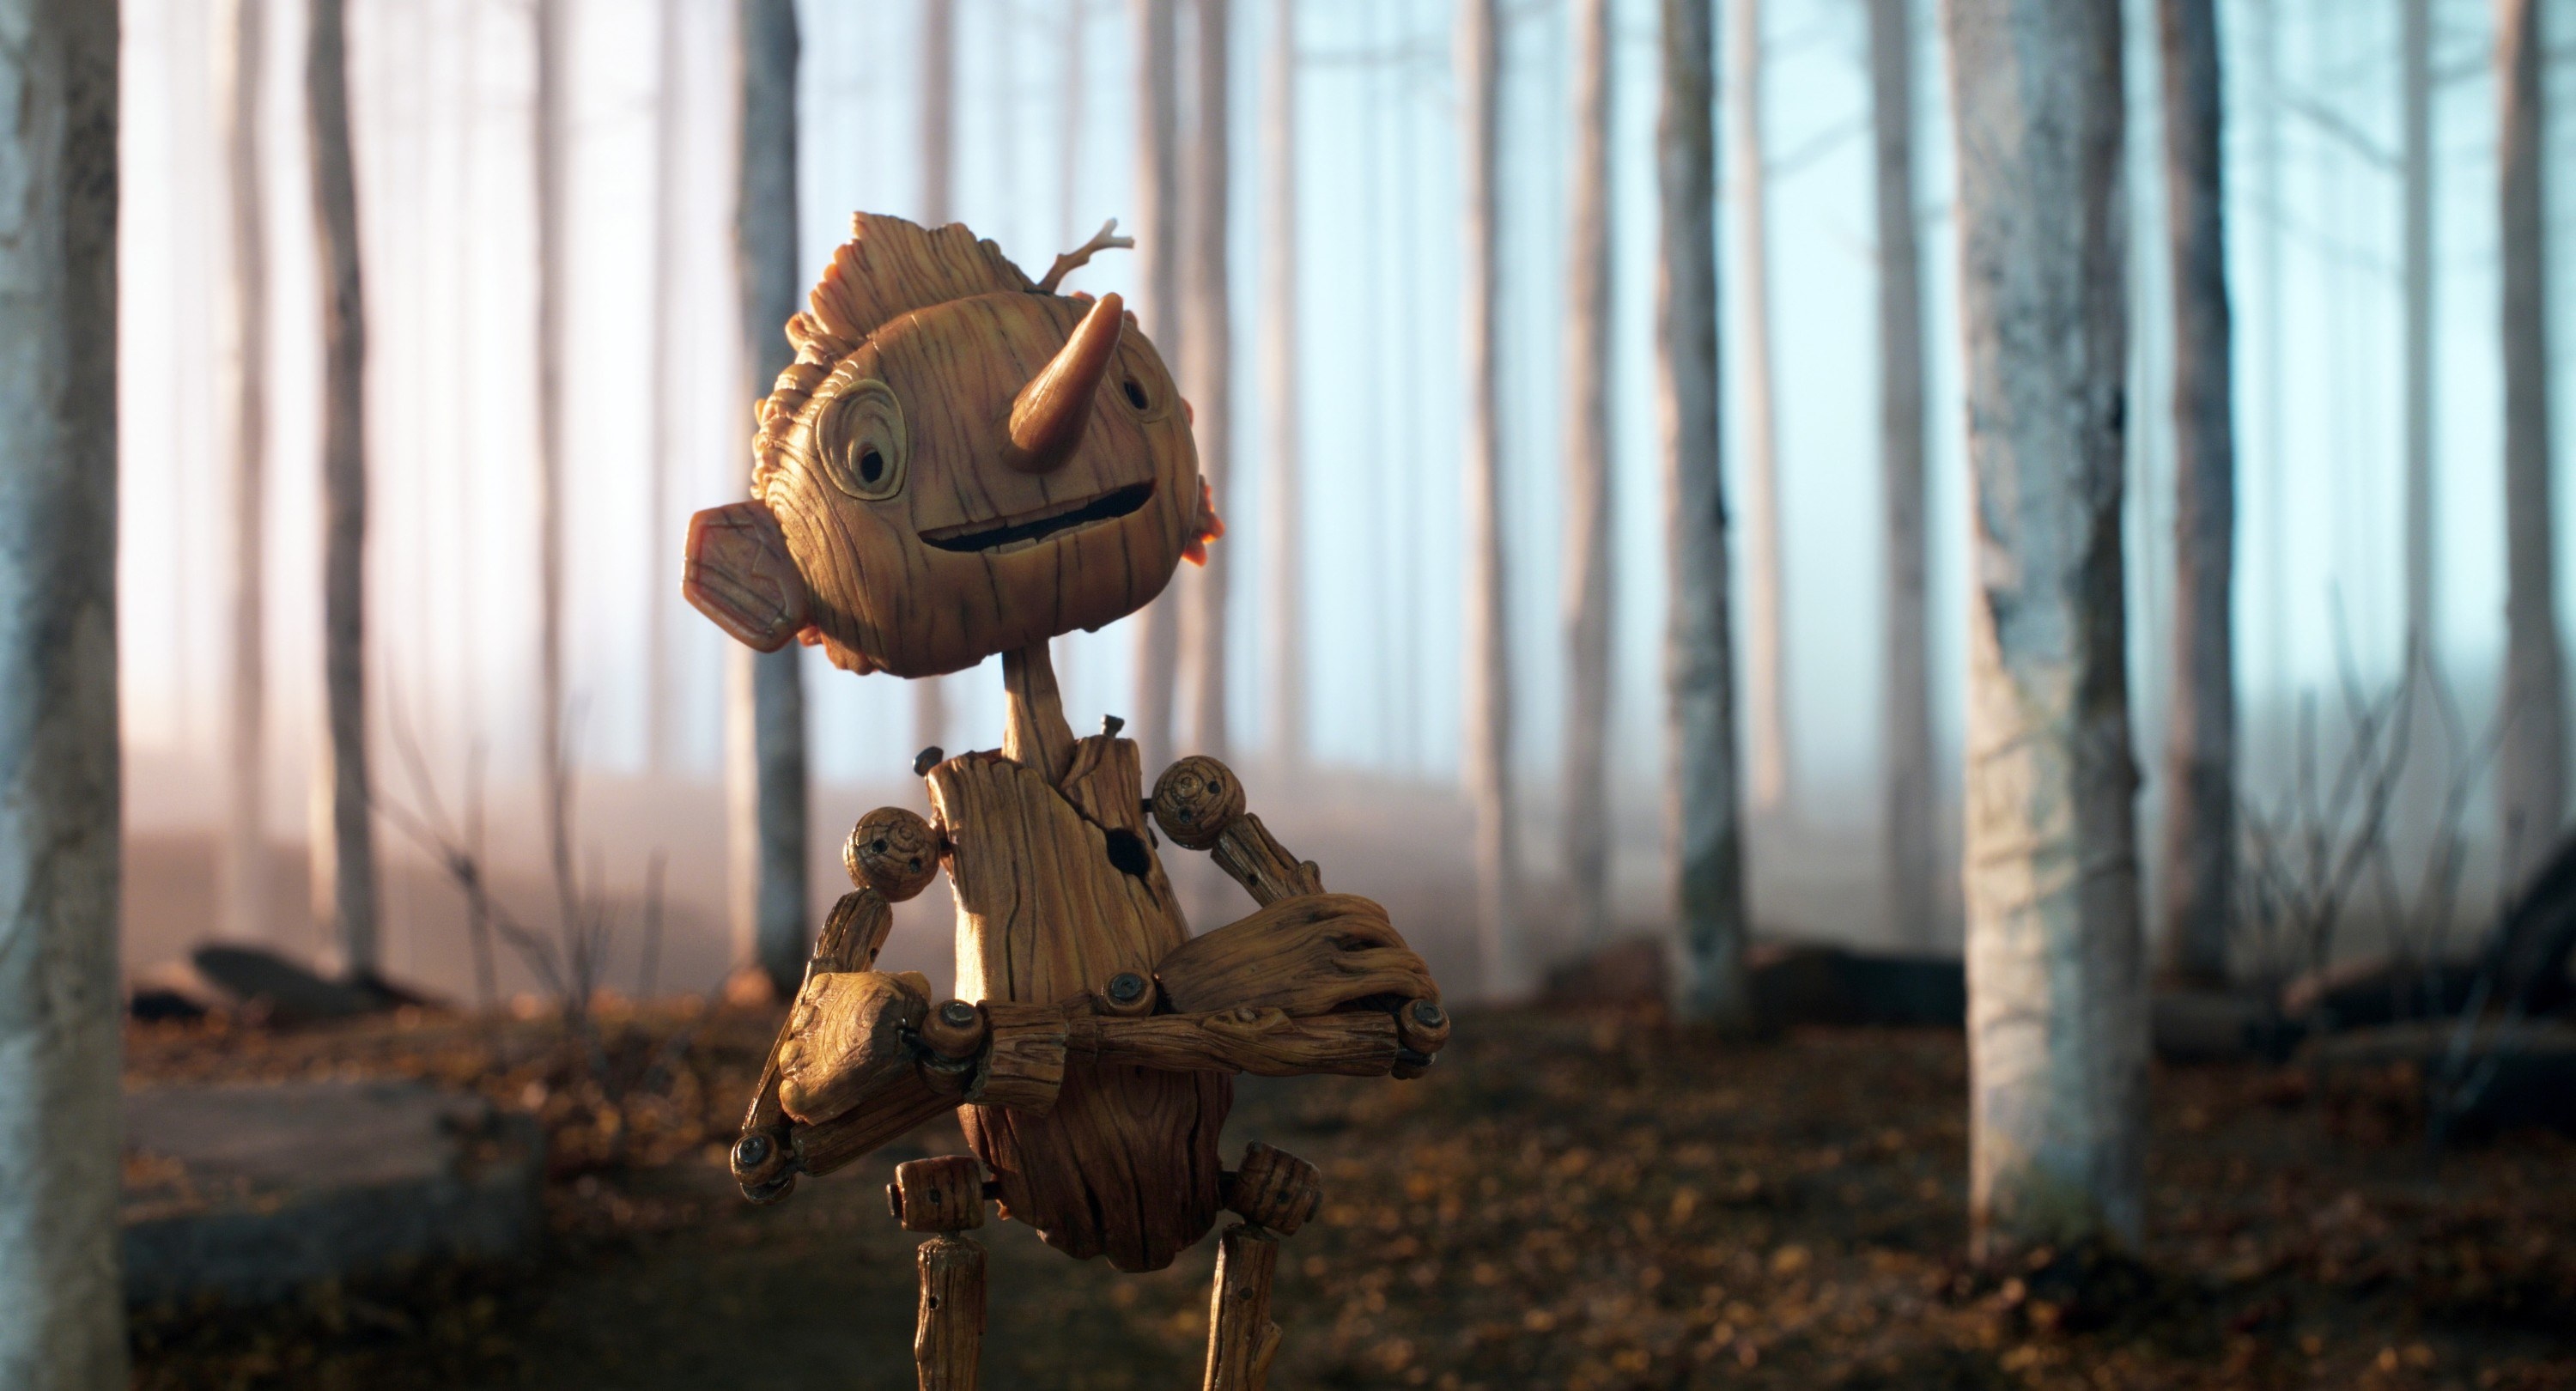 Pinocchio stands in the woods